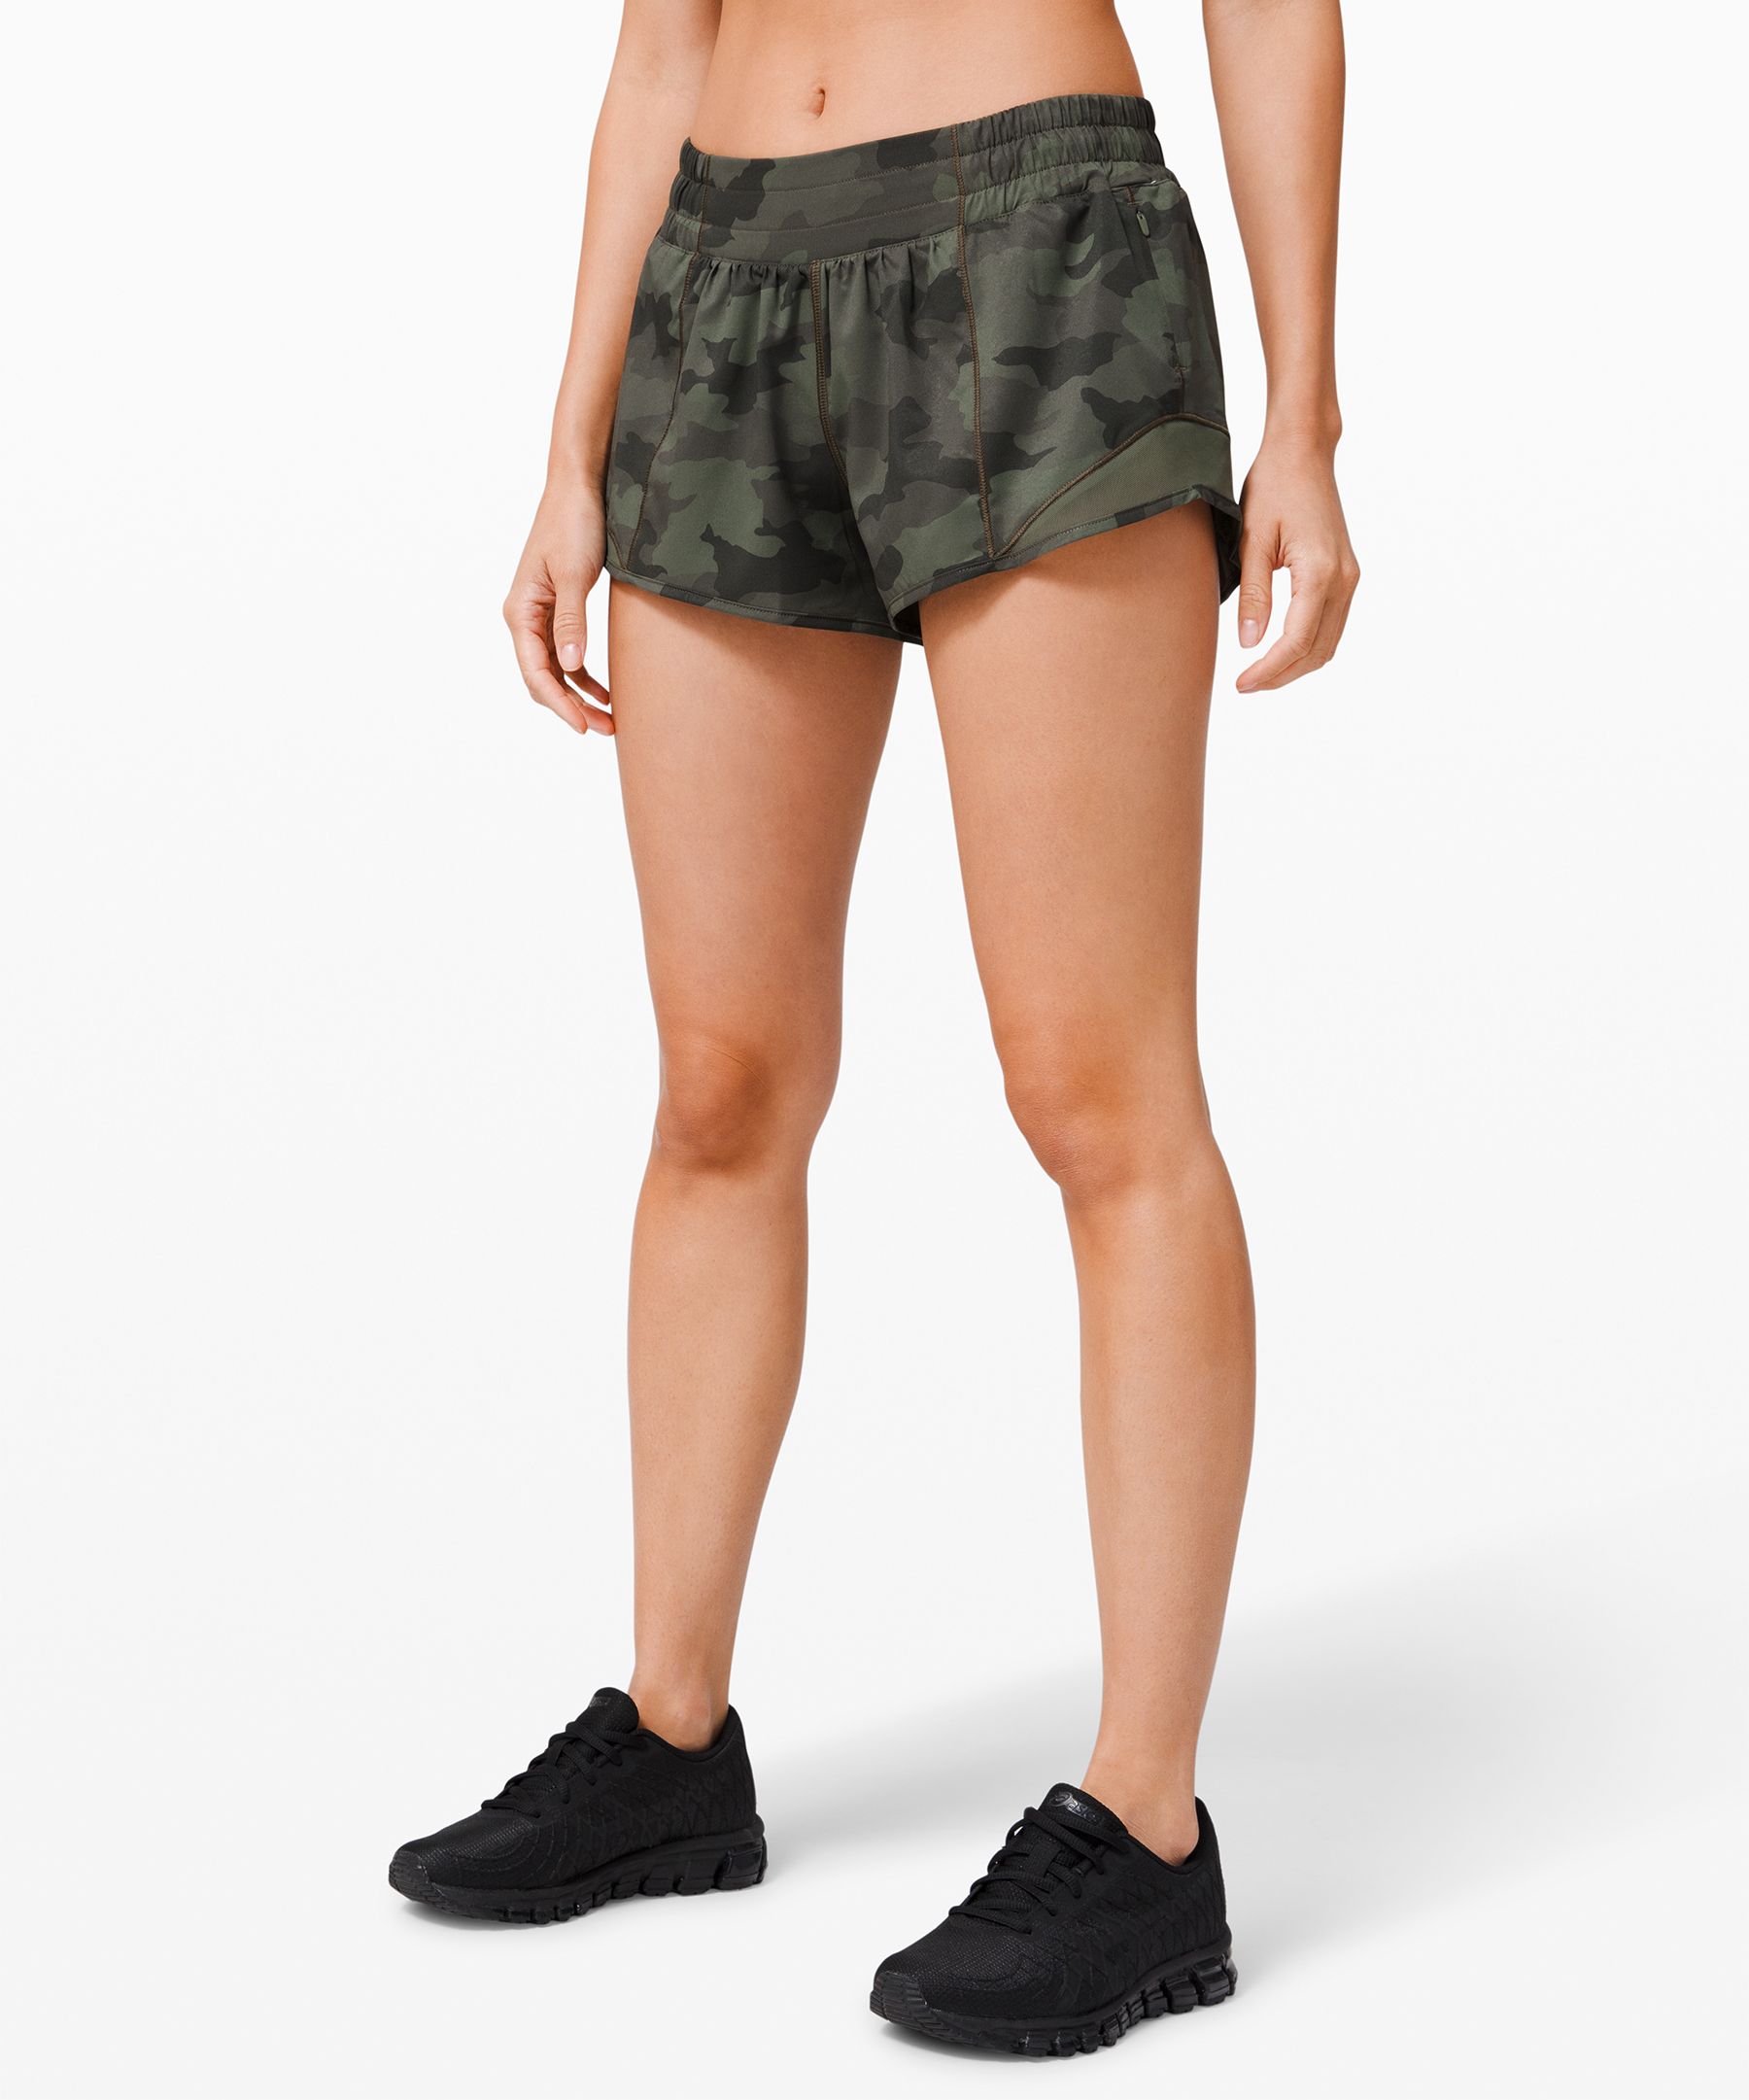 Lululemon Hotty Hot Low-rise Lined Shorts 2.5 In Heritage 365